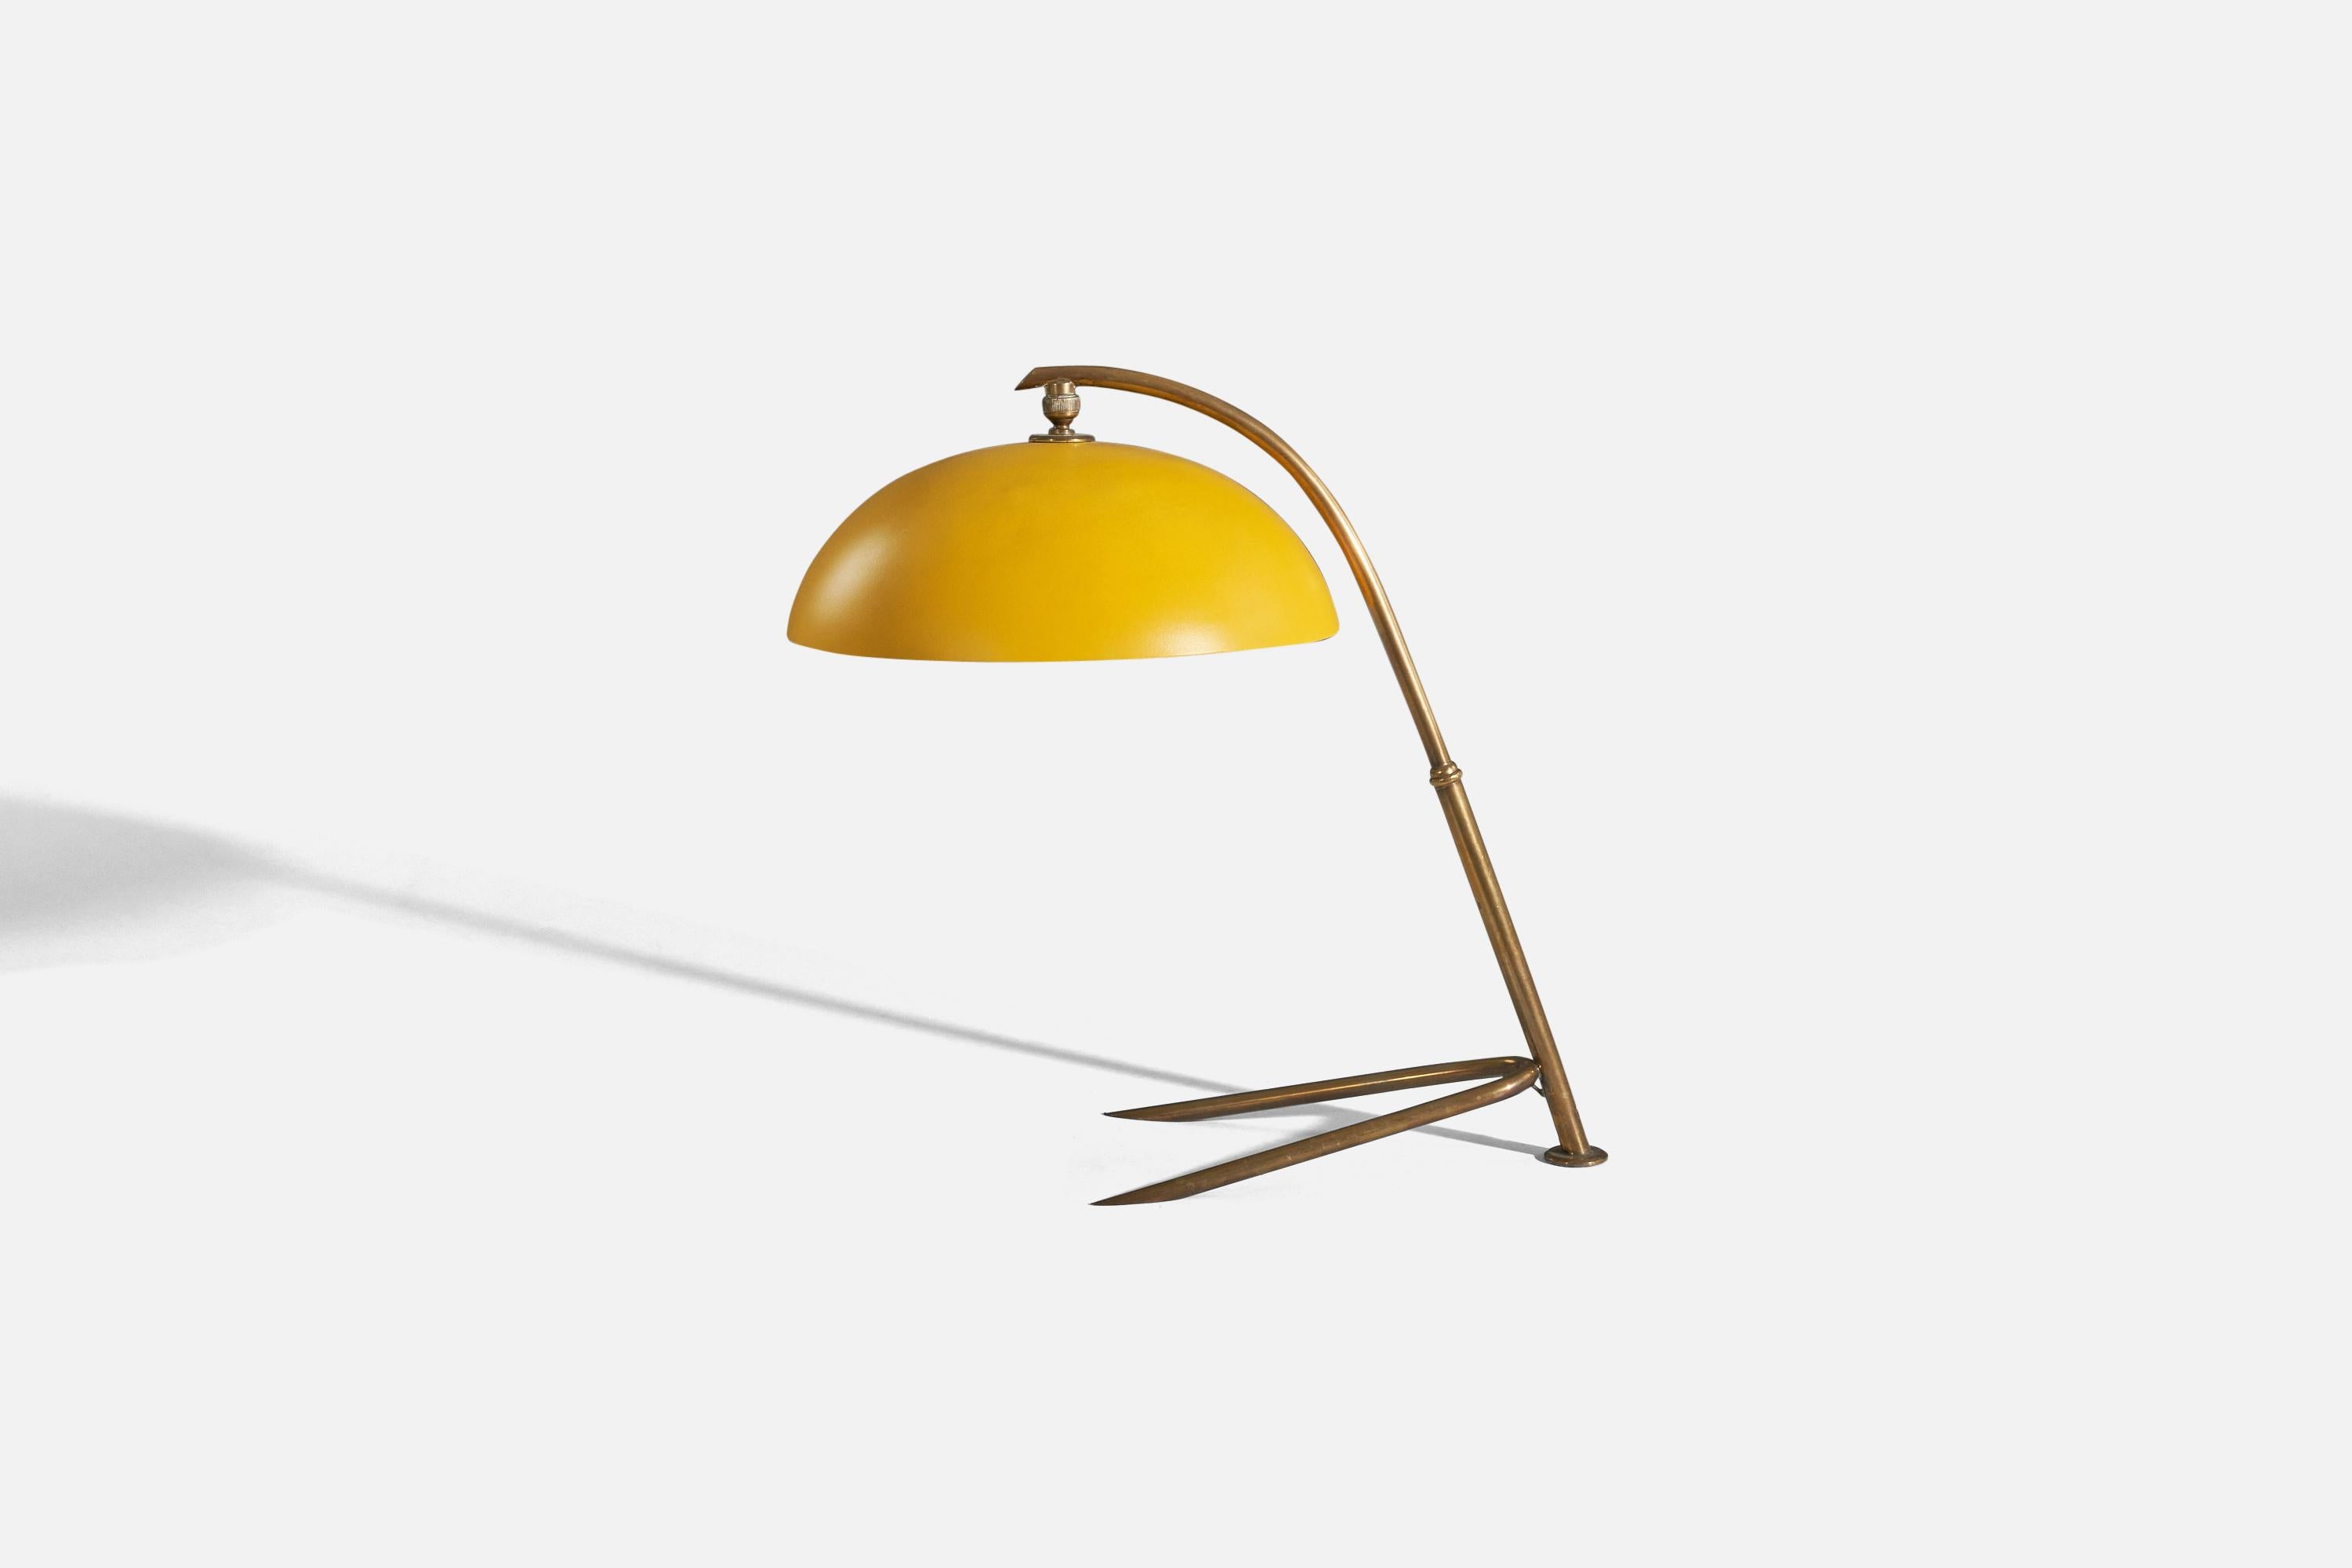 A brass and yellow-lacquered metal table lamp designed and produced by Stilnovo, Italy, 1950s.